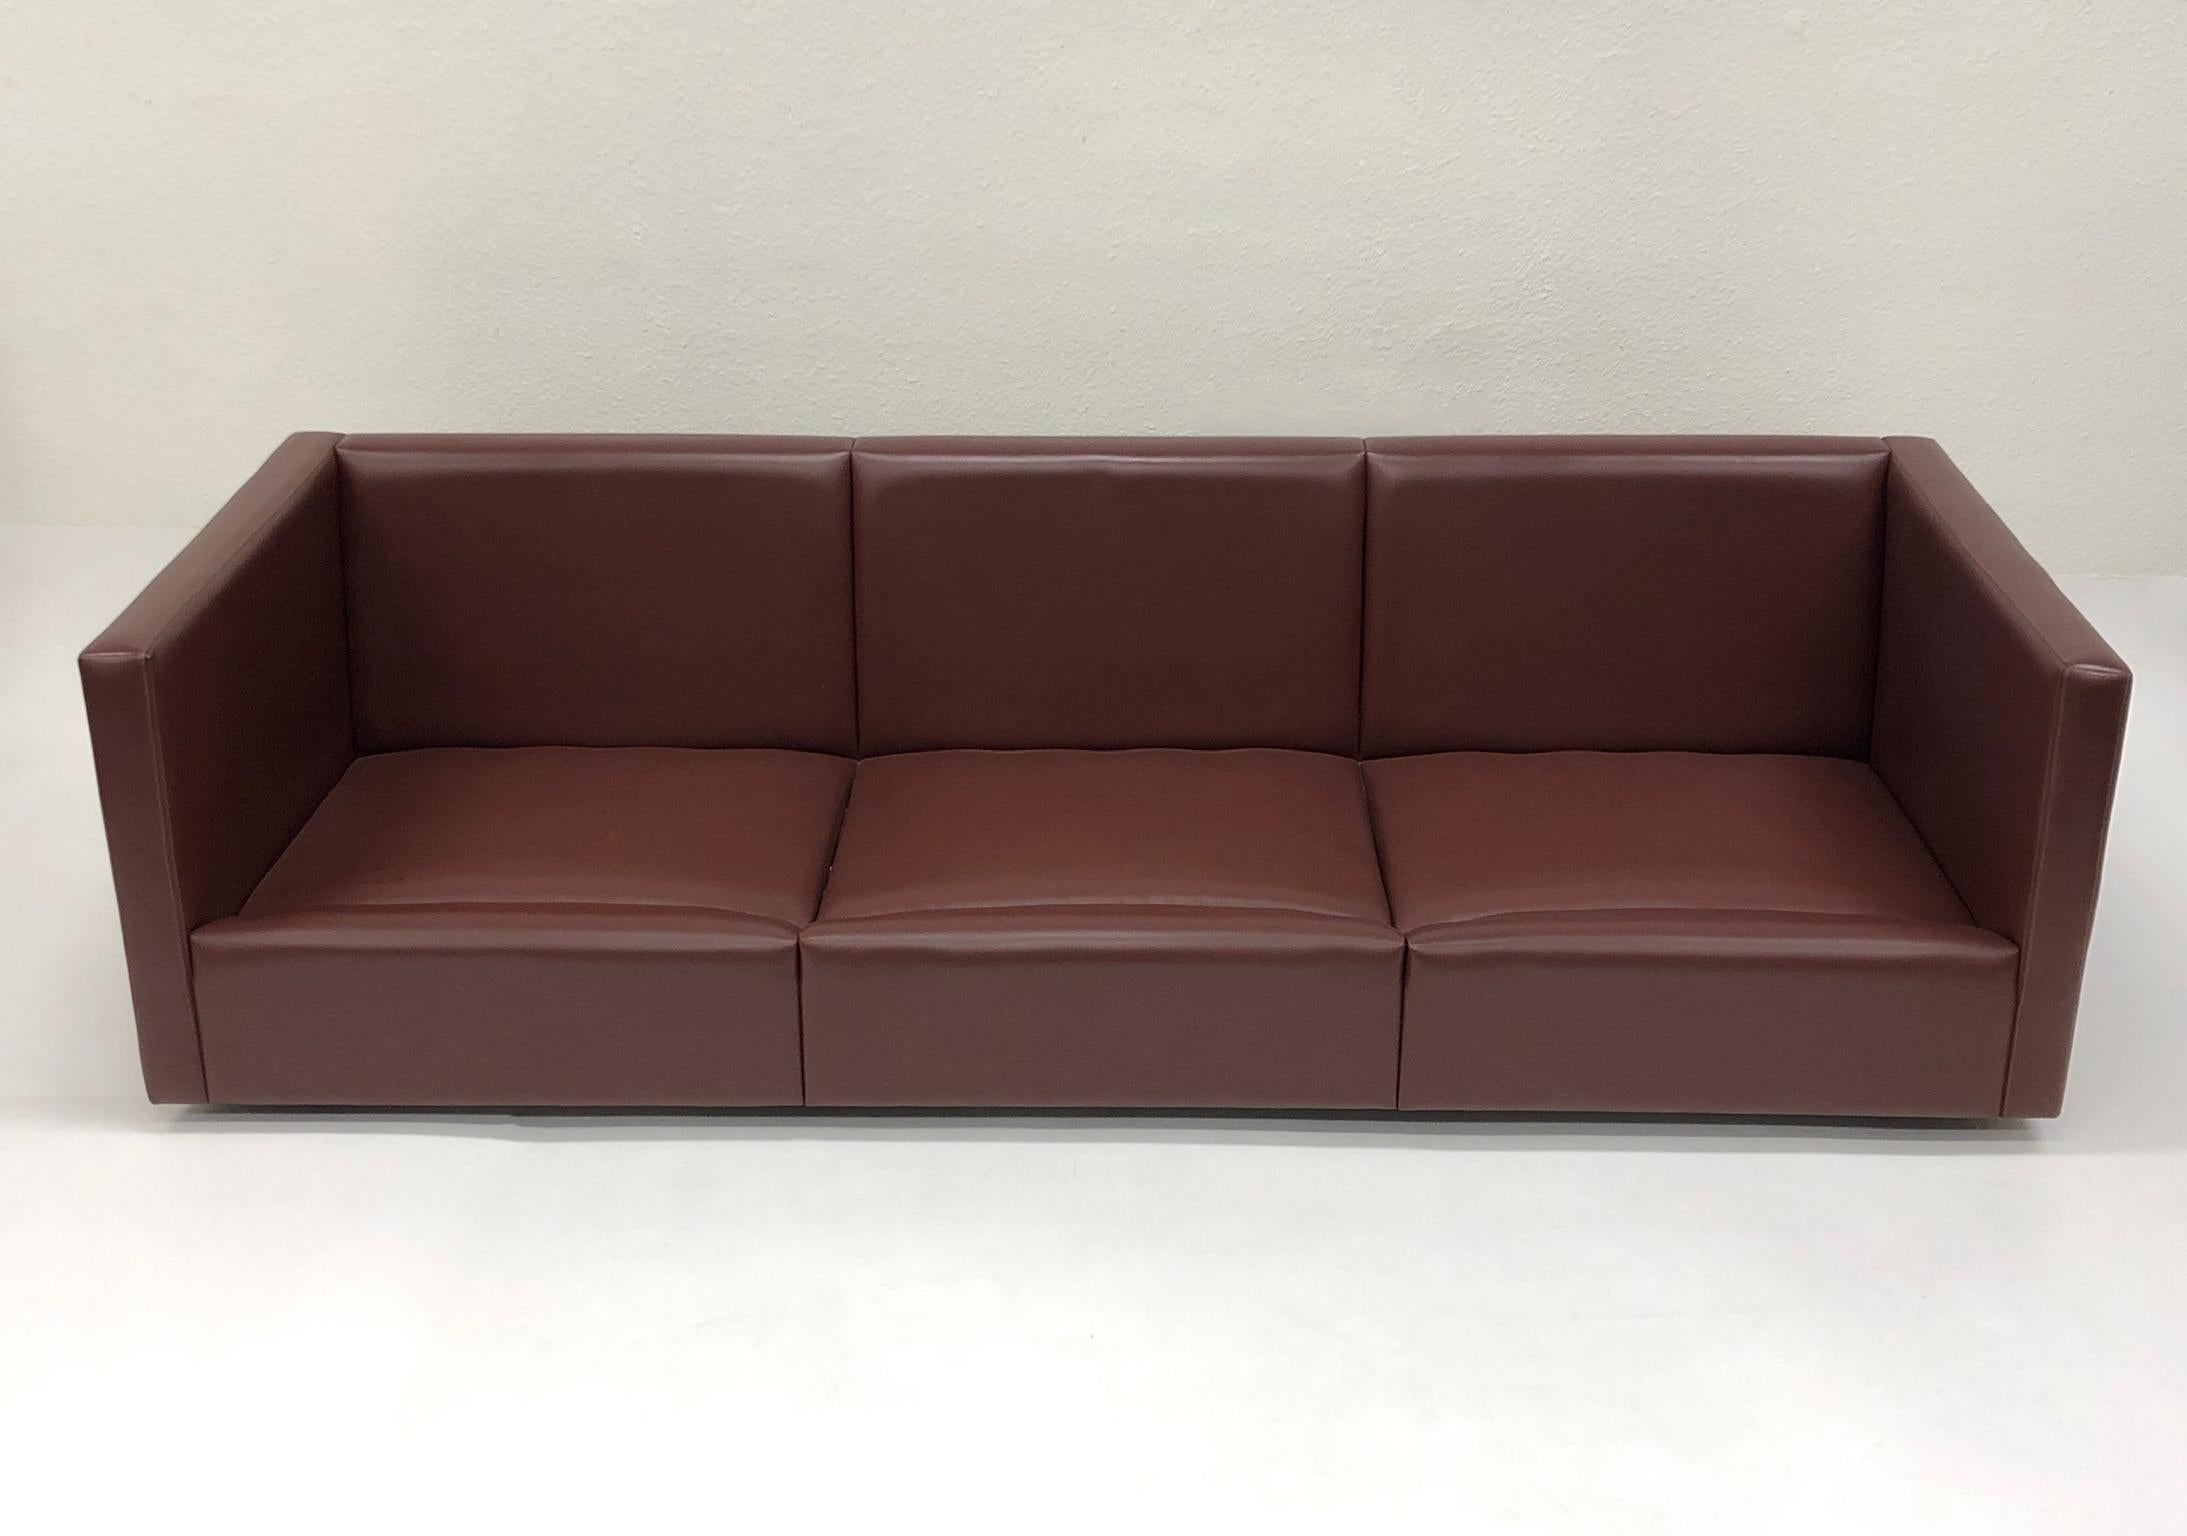 Burgundy Leather Sofa by Charles Pfister for Knoll 2